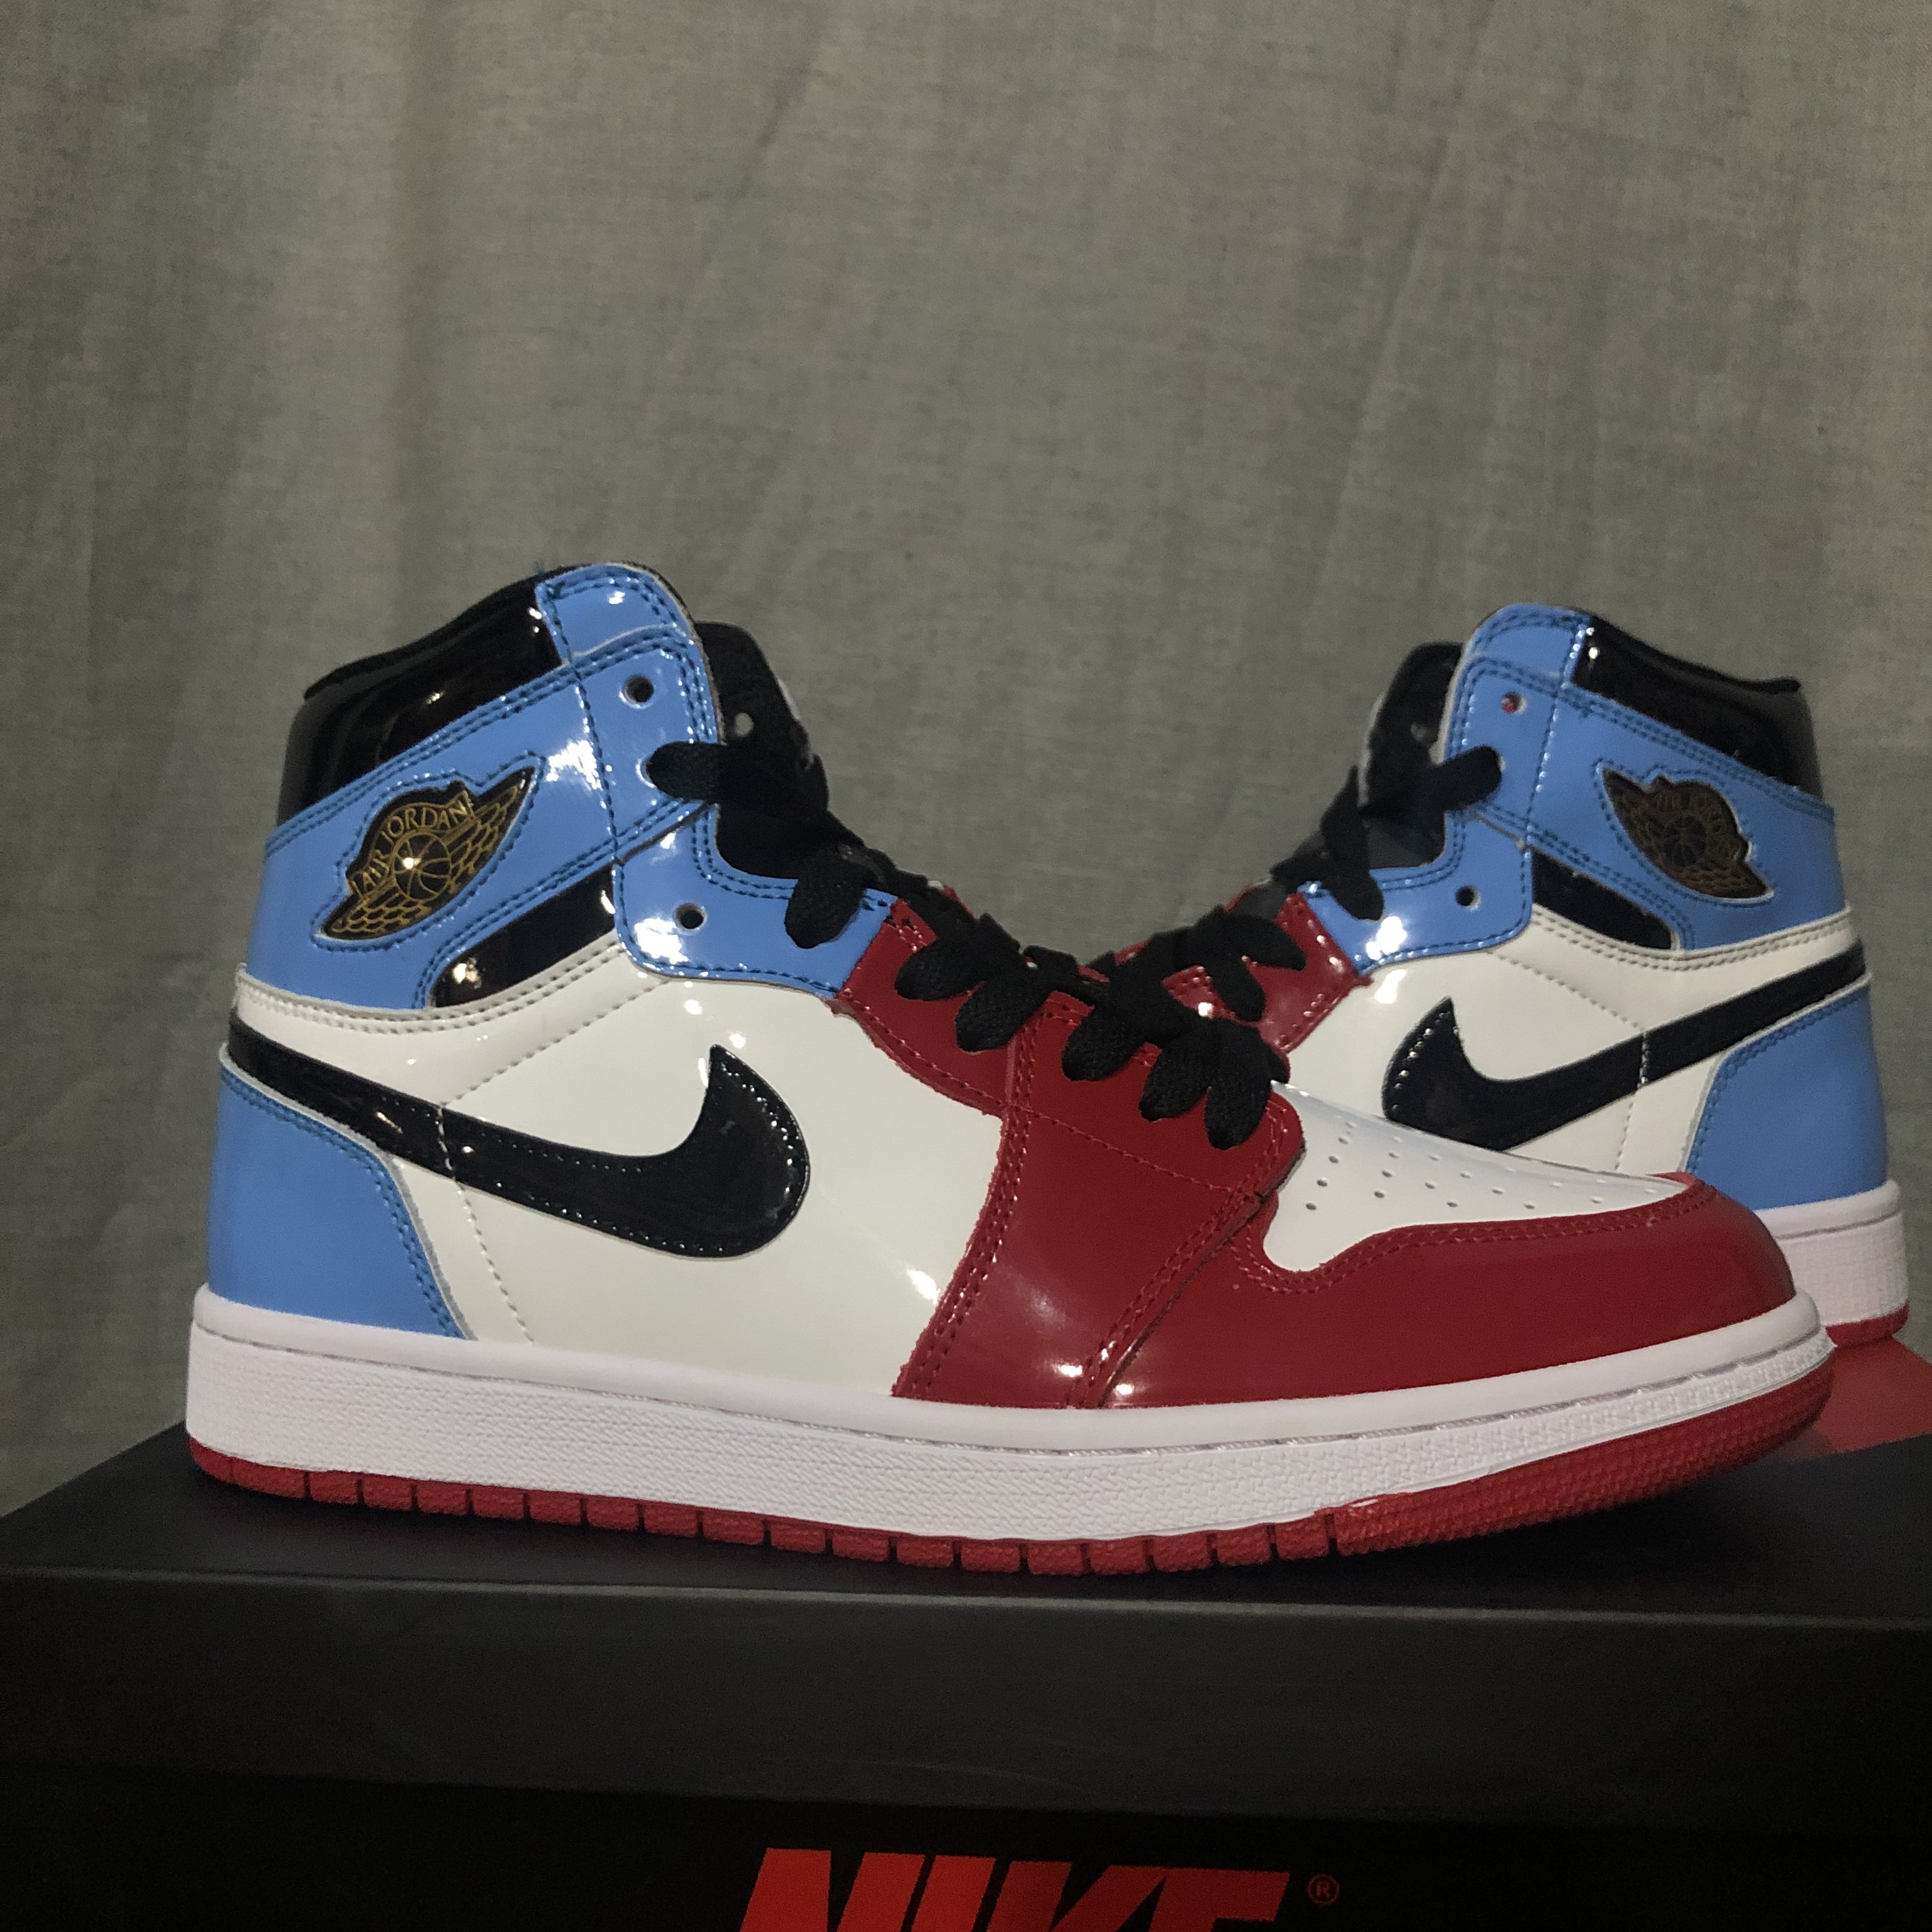 2019 Air Jordan 1 Red Patent Leather Blue Black White Shoes